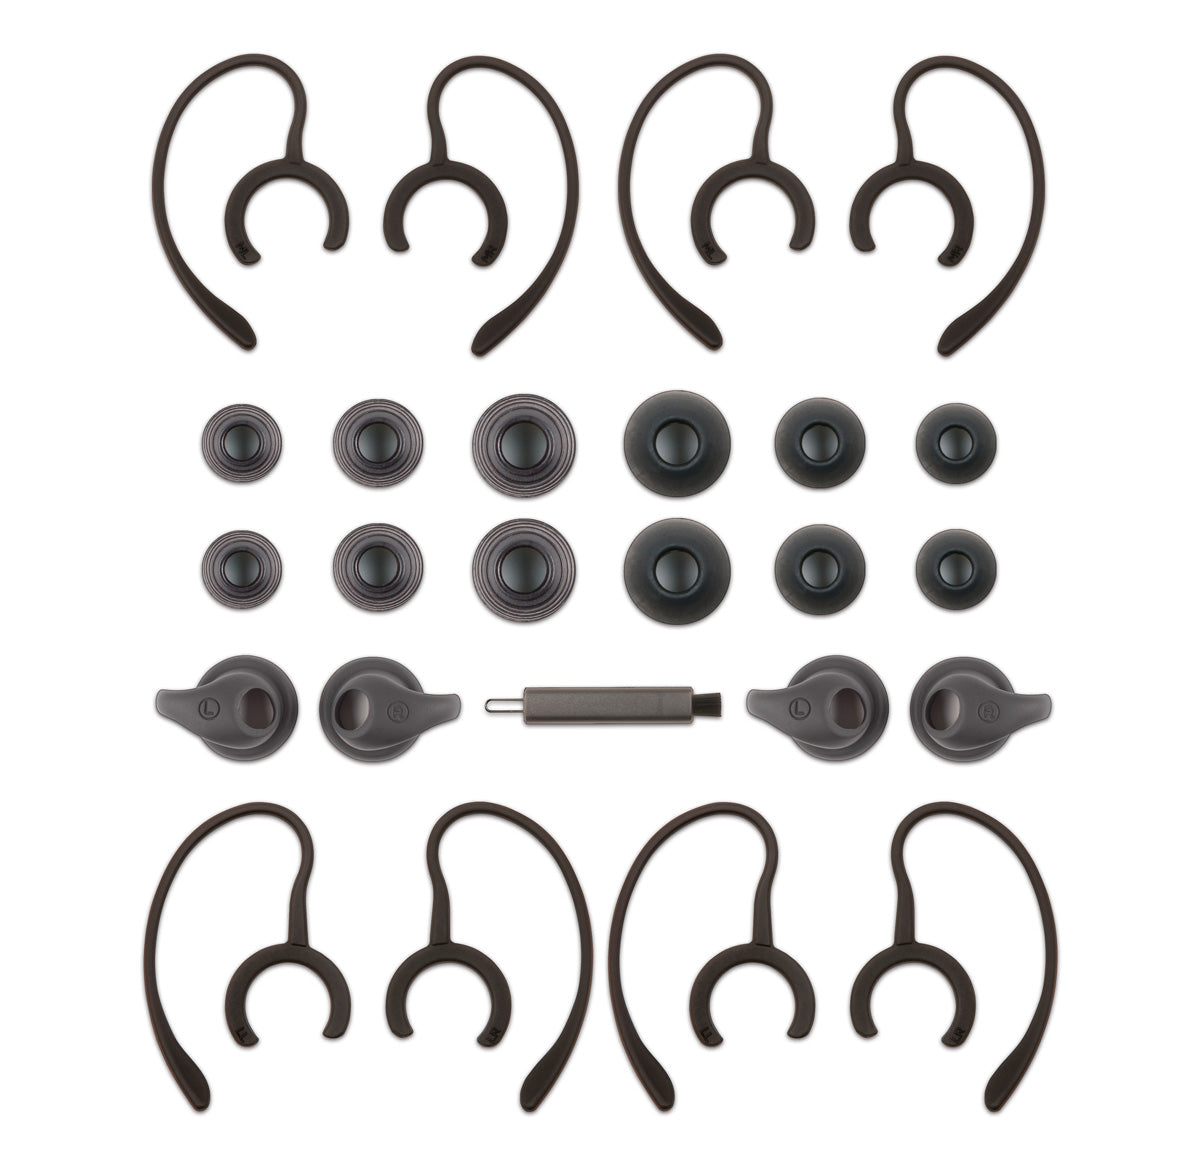 Audeze Replacement accessories kit for iSINE includes 4 sets of curved  earhooks, 3 sizes ear tips, & ear fins-silicone eartips-Audeze-PremiumHIFI